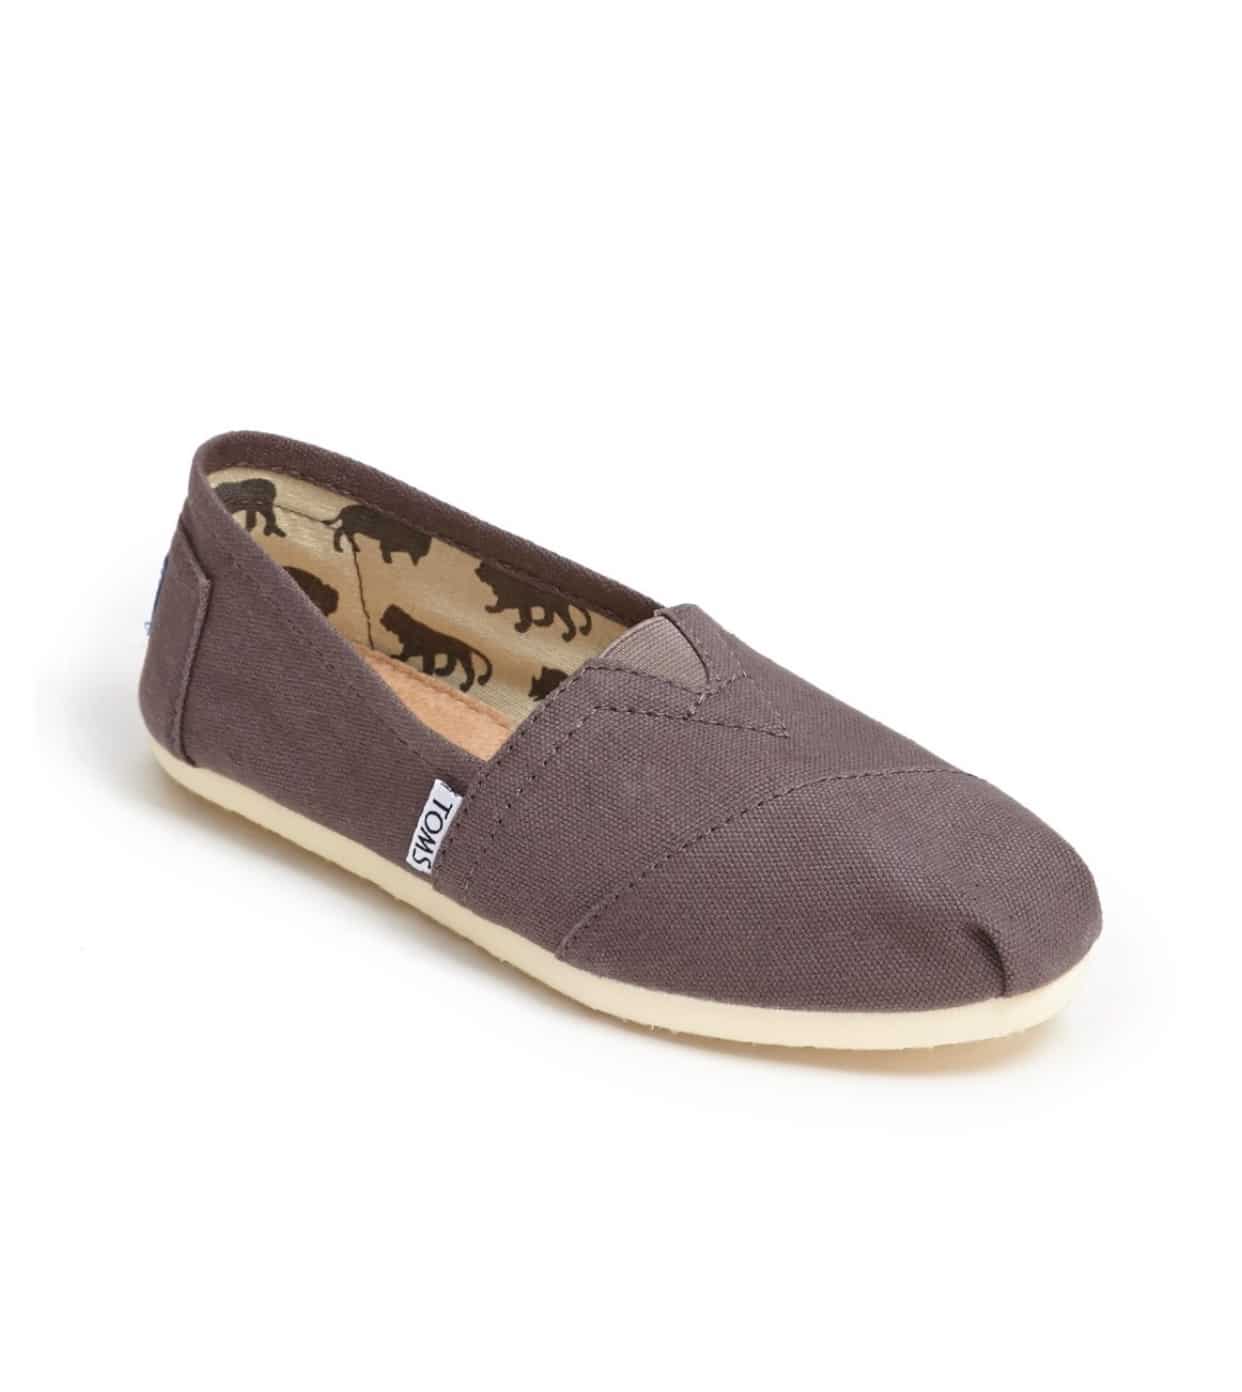 Nordstrom: 'Classic' Canvas Slip-On TOMS - Elevated Style